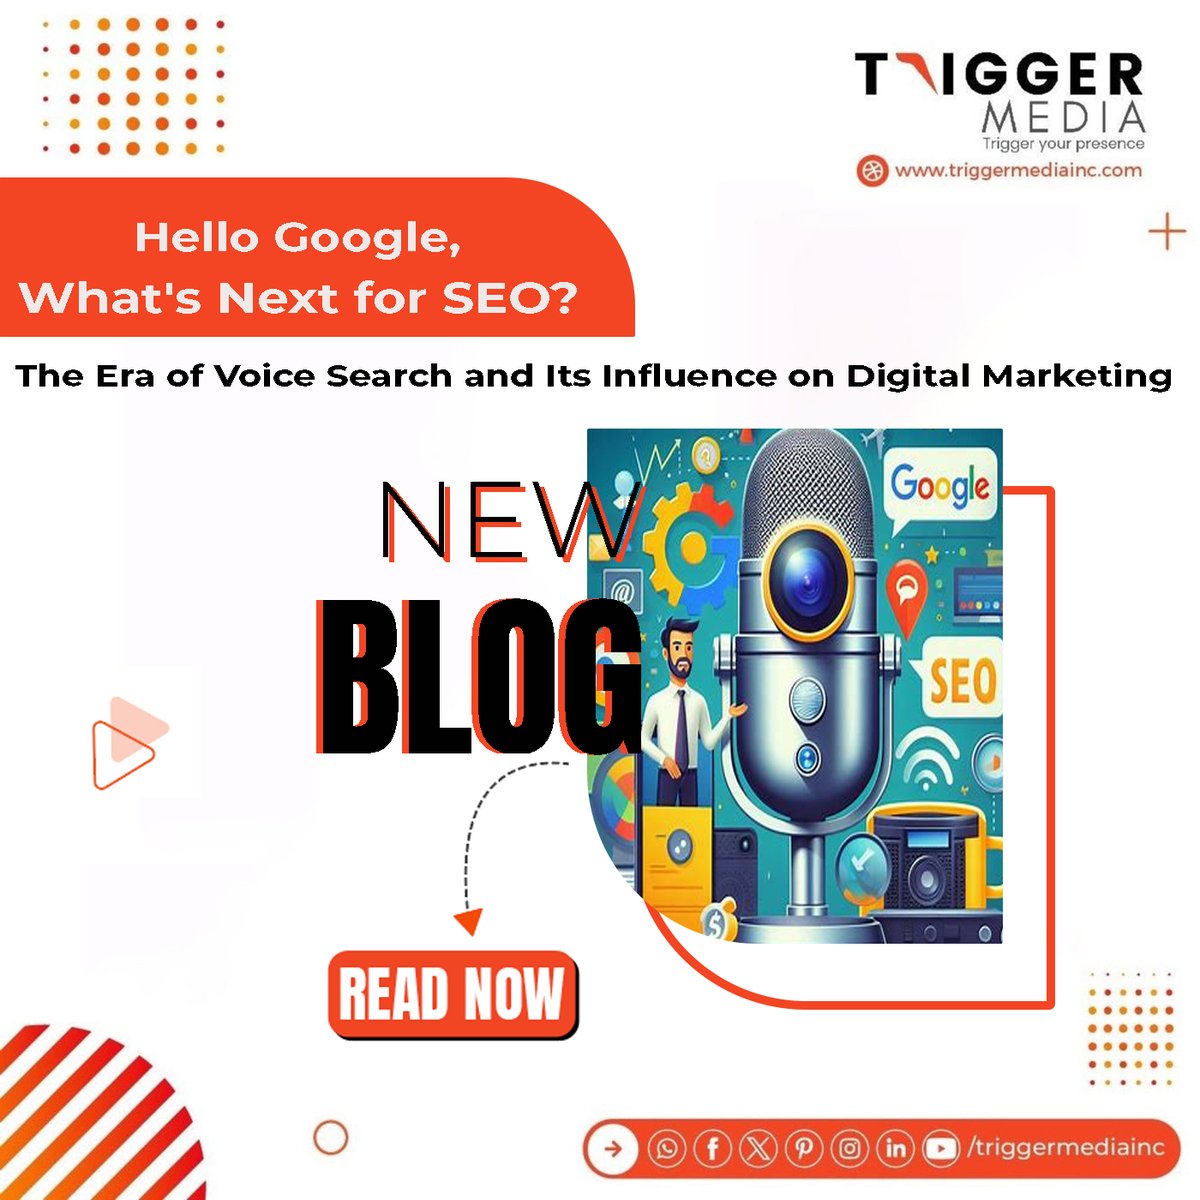 Embark on a journey through the world of #VoiceSearch and #SEO in 2024! 🚀⚓️ Discover how the Era of Voice Search is shaping the future of #DigitalMarketing in this #latestblog👉triggermediainc.com/blog/Voice-Sea…
#SEO2024  #Marketing #SEOTips #TriggerMediaInc #TriggerYourPresence #LetsChat